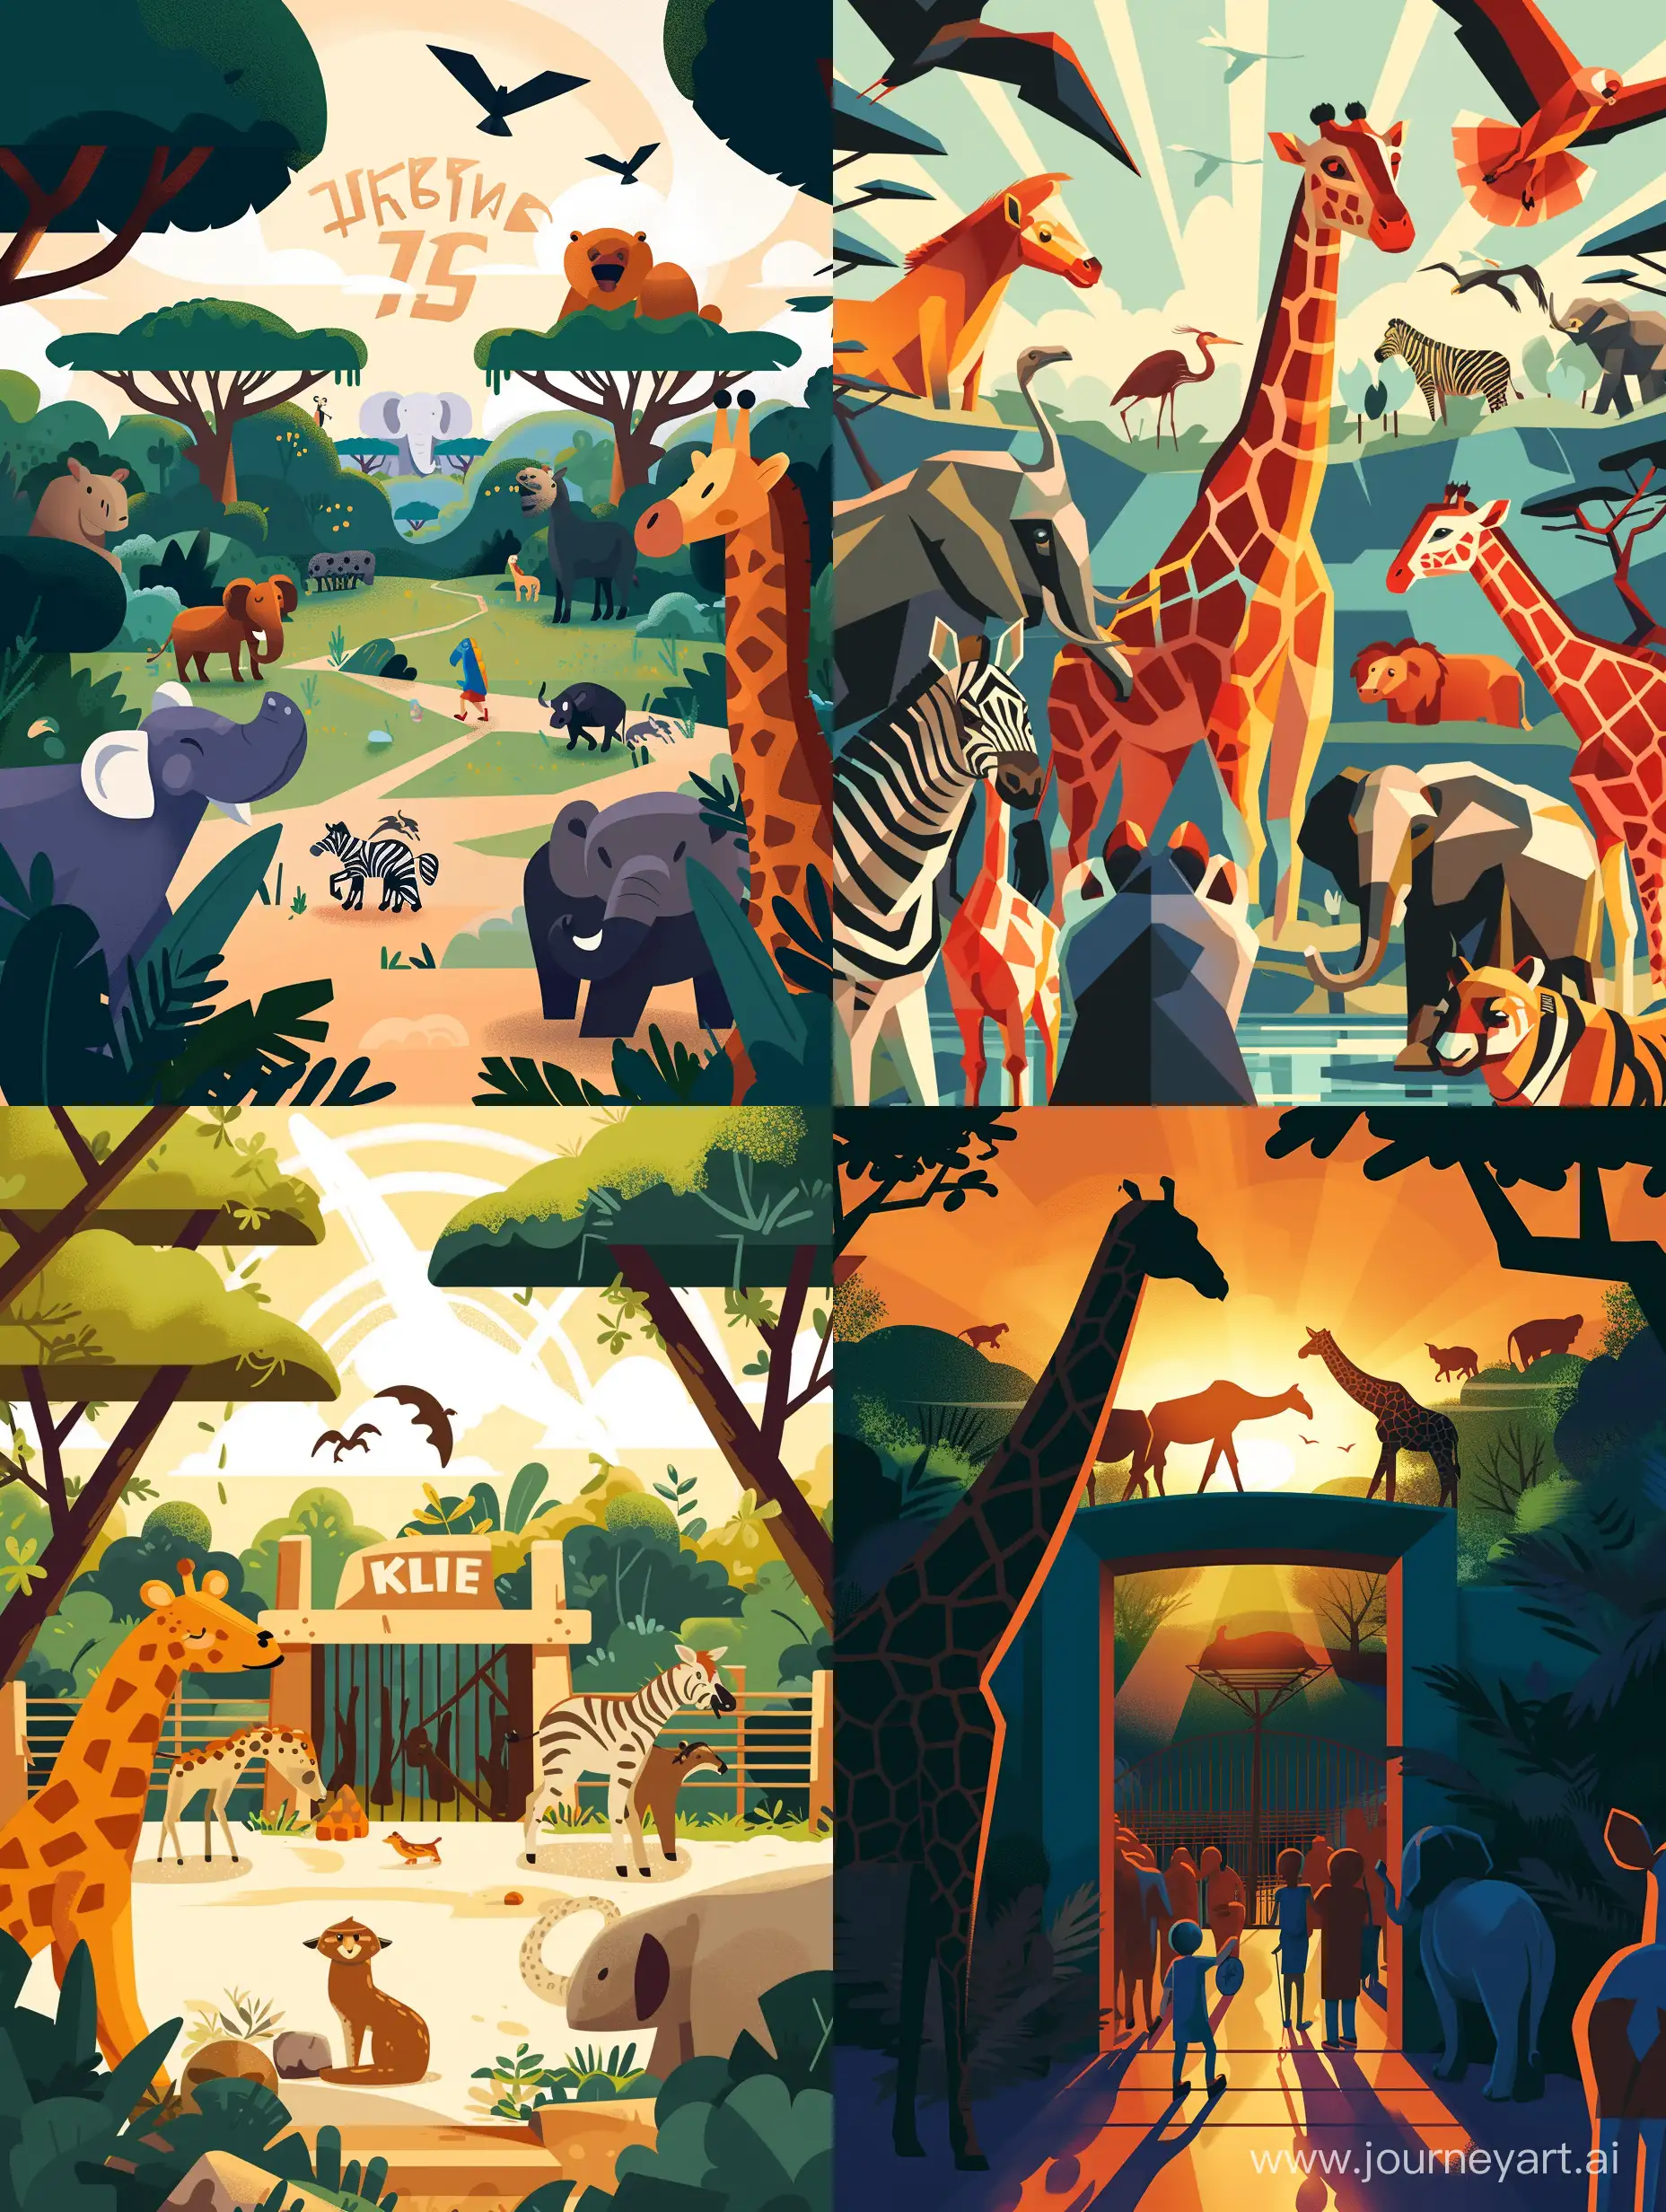 Zoo, illustration, flat illustration, Light and shadow illustration, intense  visual impact with strong contrast of light and shadows
